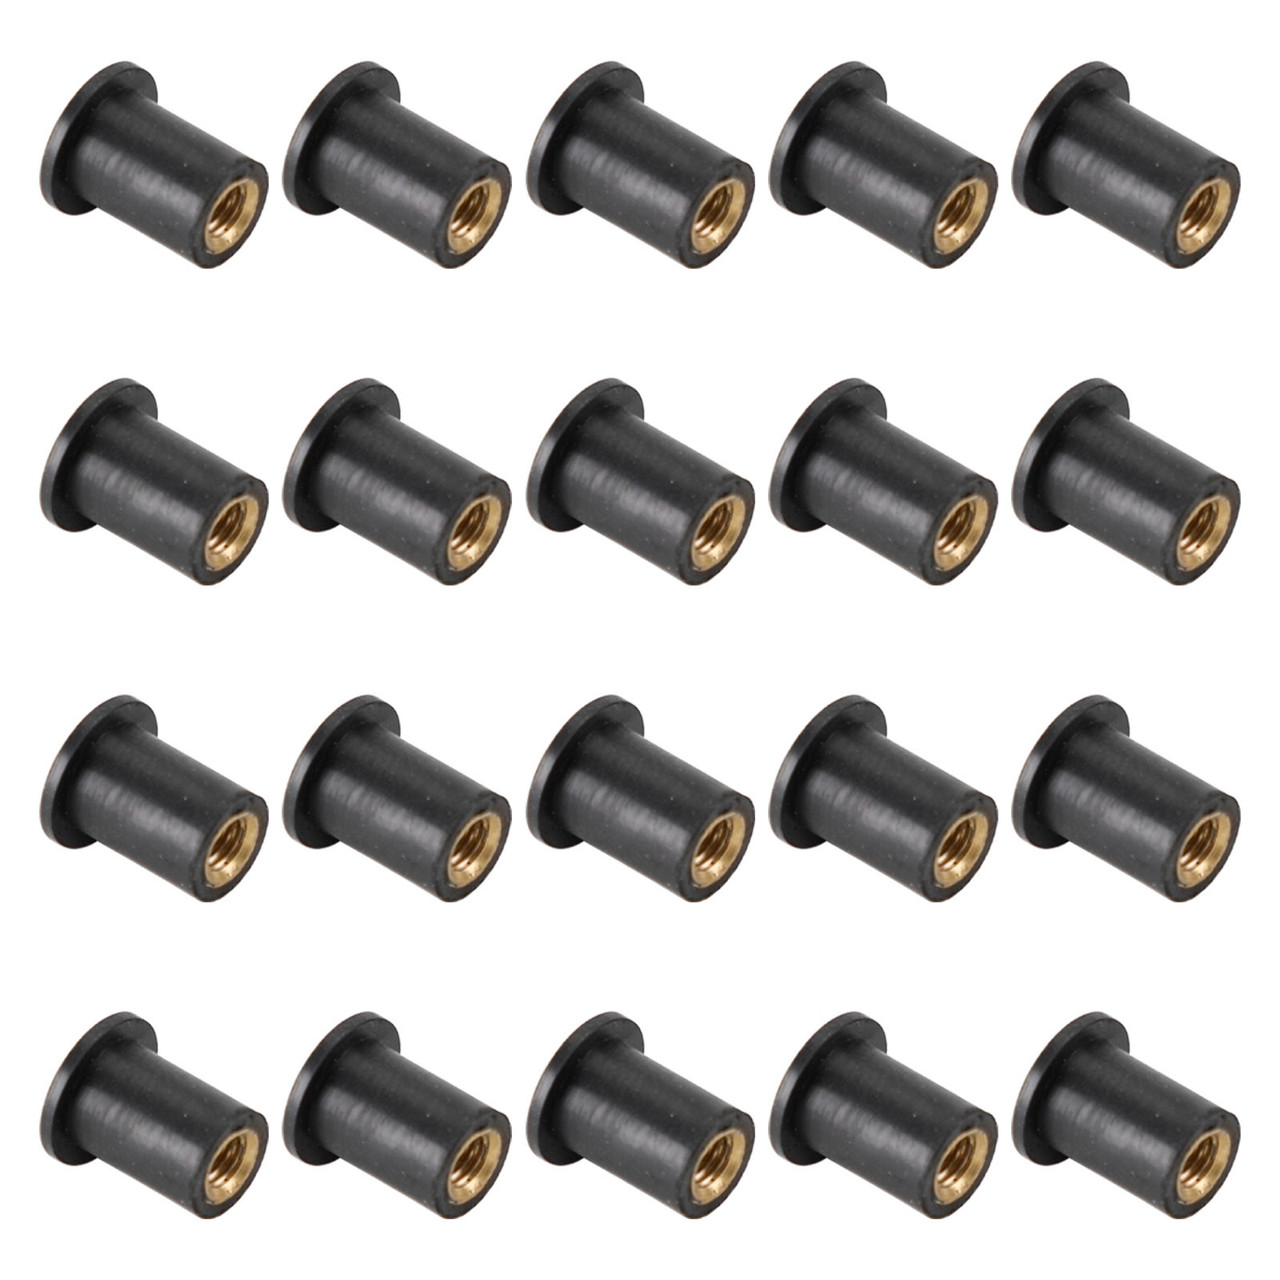 20pcs M5 Rubber Well Nuts Wellnuts for Fairing & Screen Fixing Pack of 10 - 10mm Hole